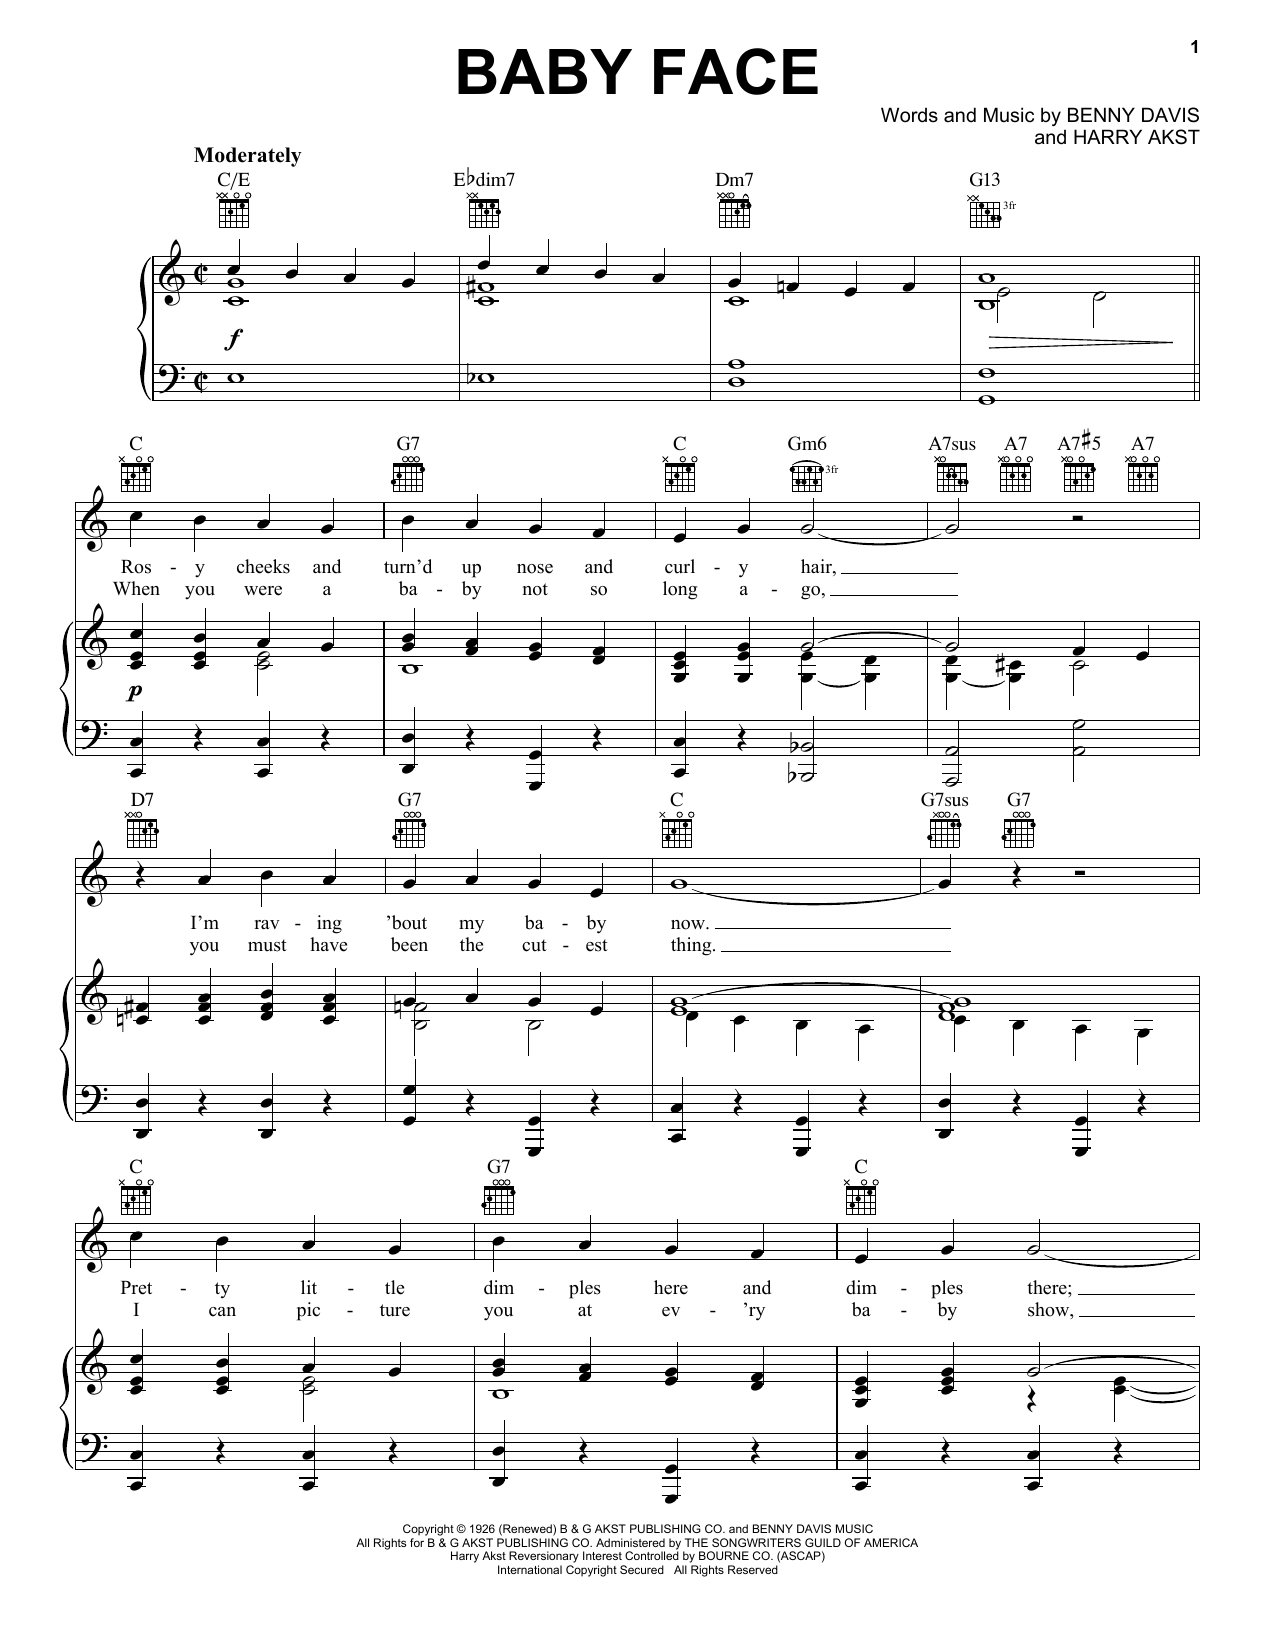 Download Harry Akst Baby Face Sheet Music